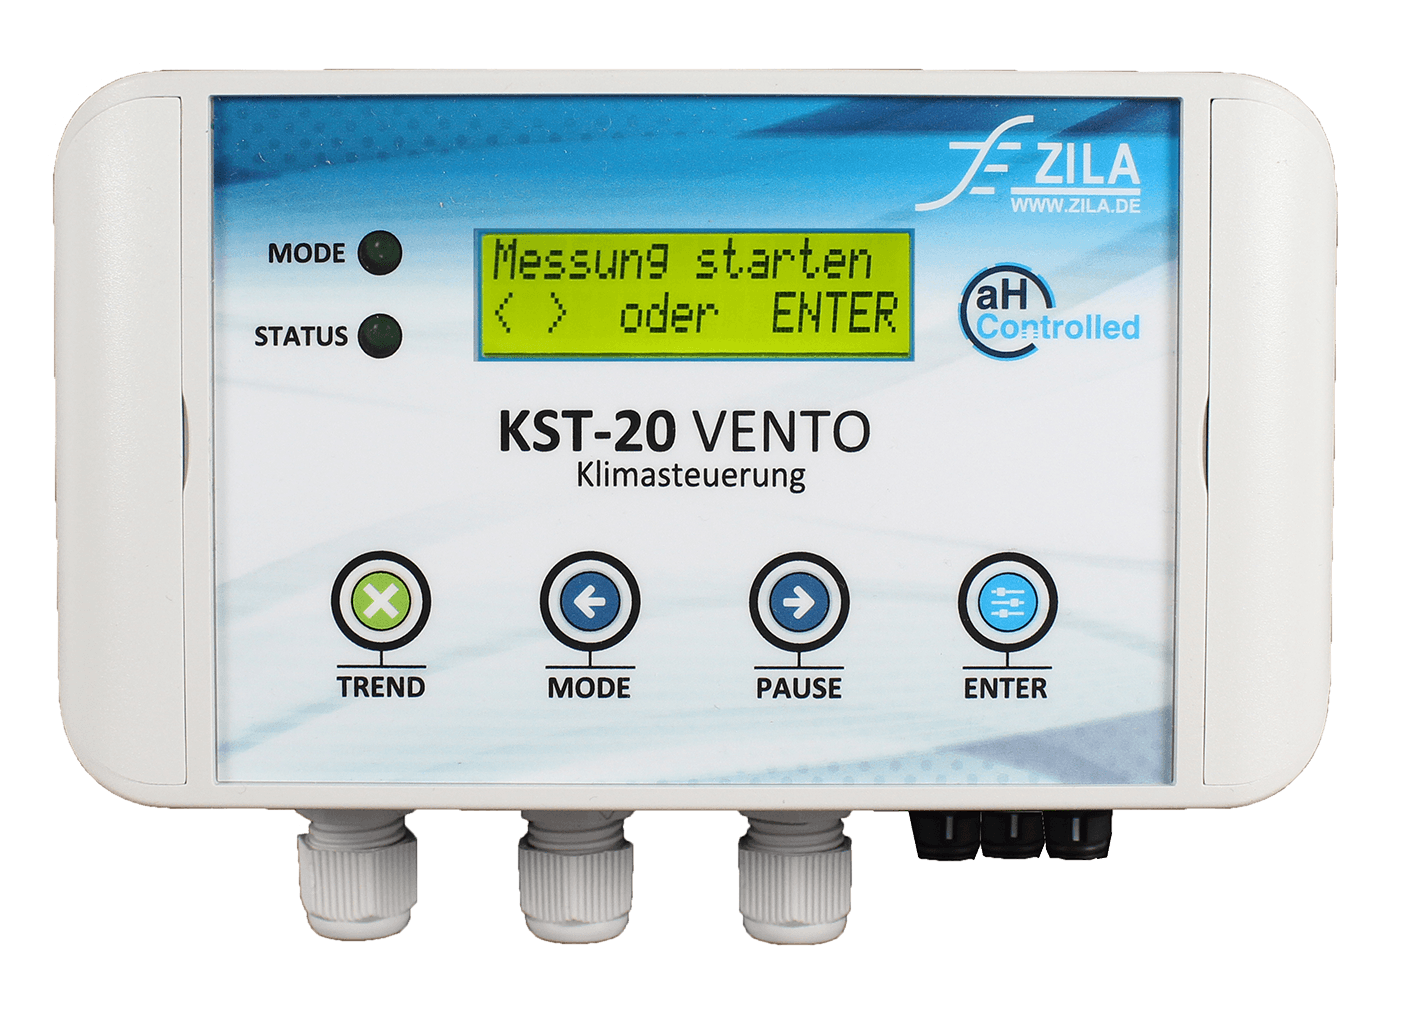 Product climate control KST-20 Vento automatic, controlled and needs-based ventilation, dehumidification